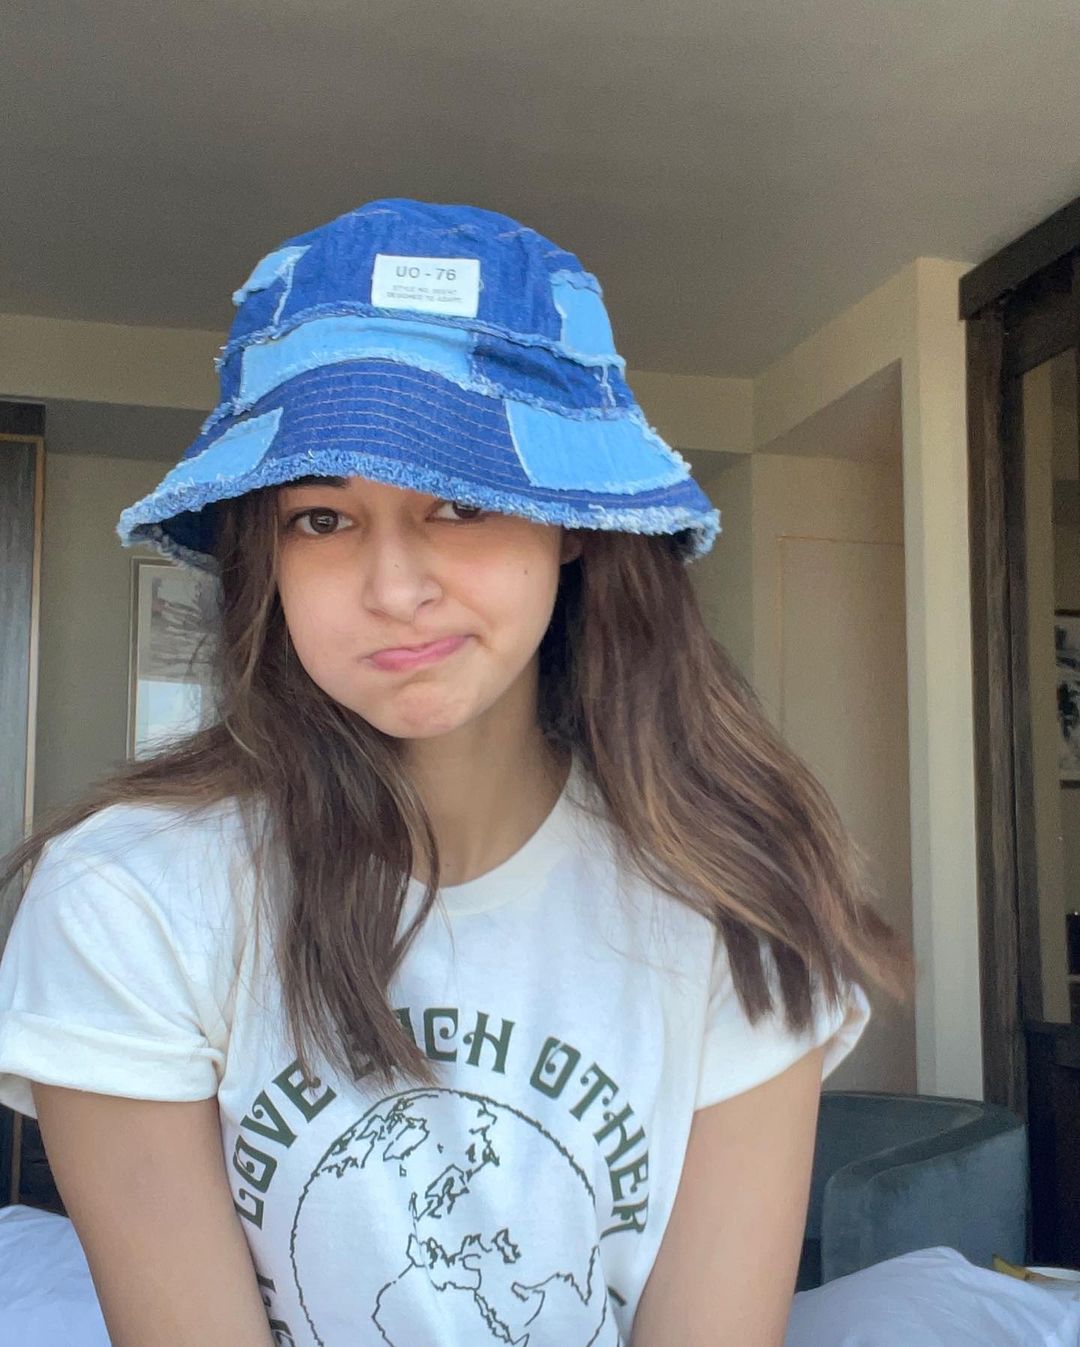  Ananya Panday's candid clicks in a denim patchwork hat have been well received by her fans. (Image: Instagram)